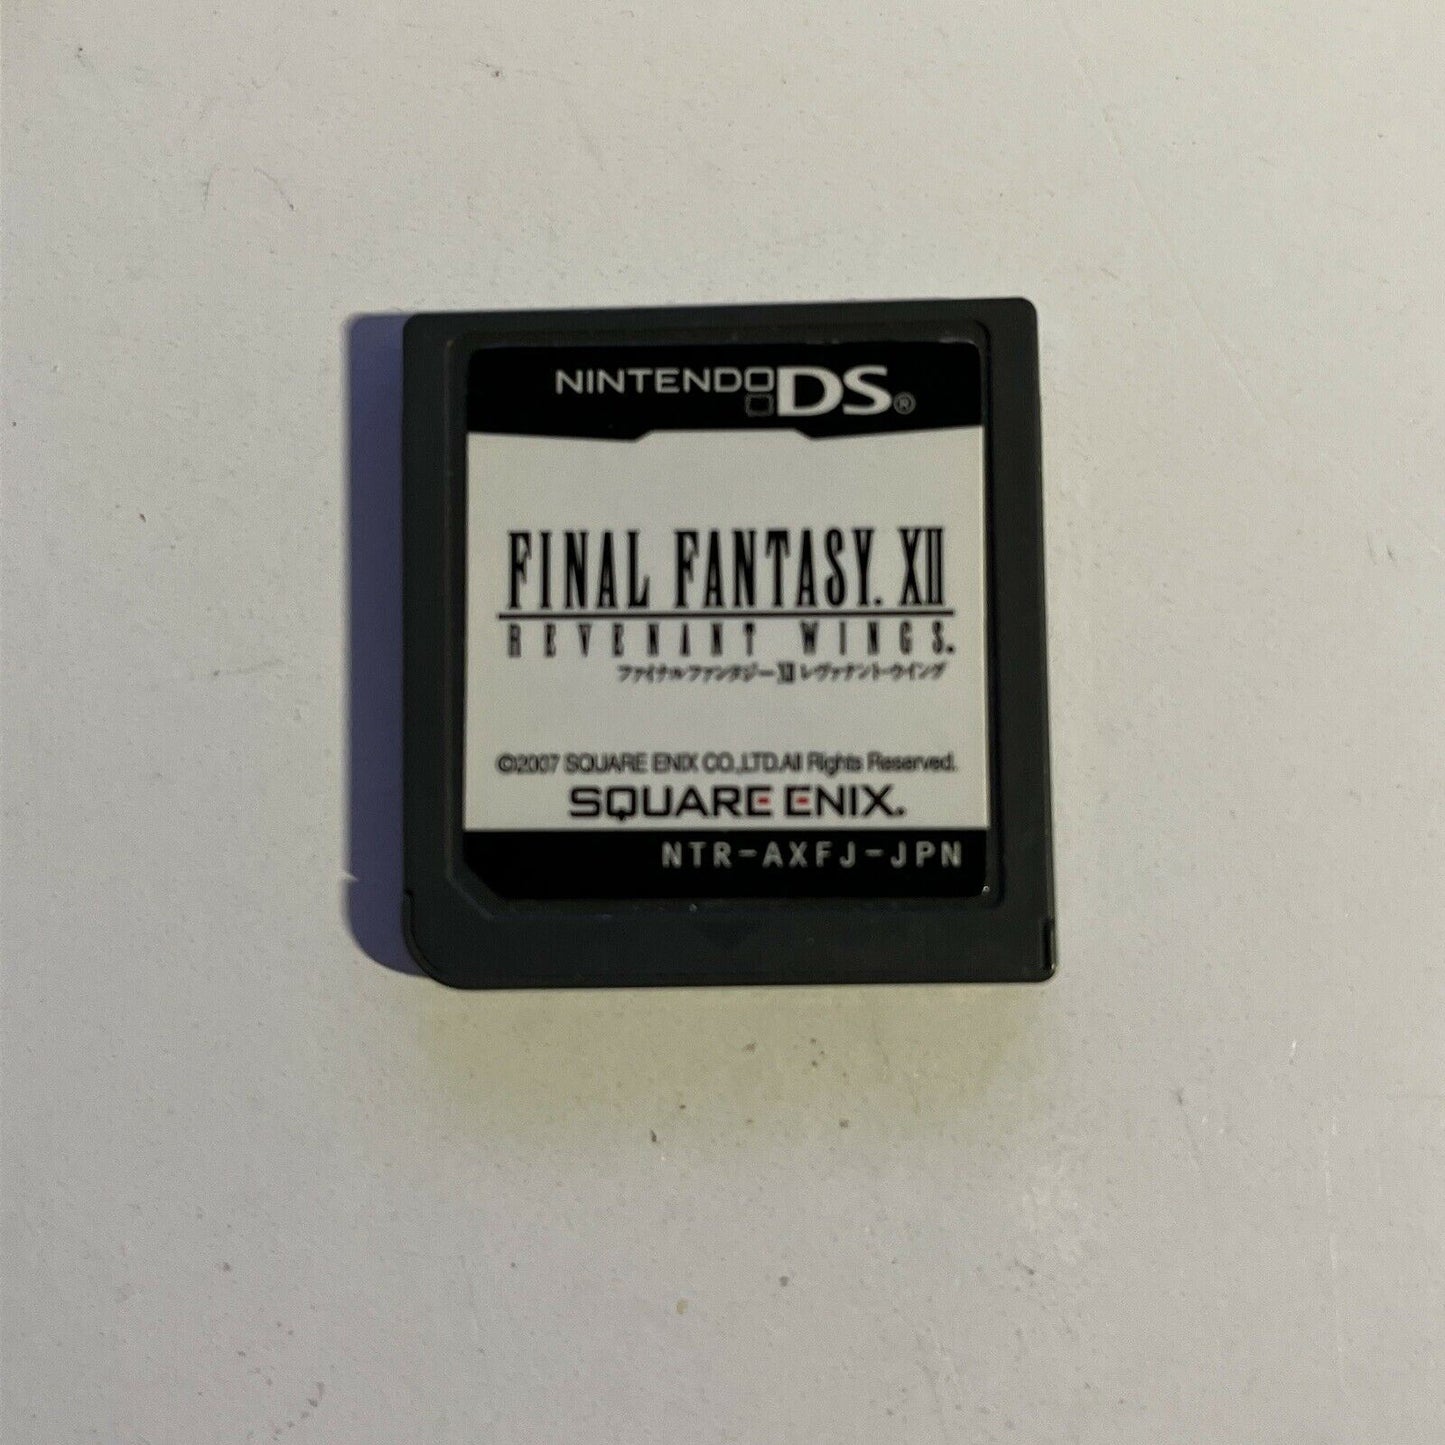 Final Fantasy XII: Revenant Wings - Nintendo DS Japan NDS Game *Cartridge Only